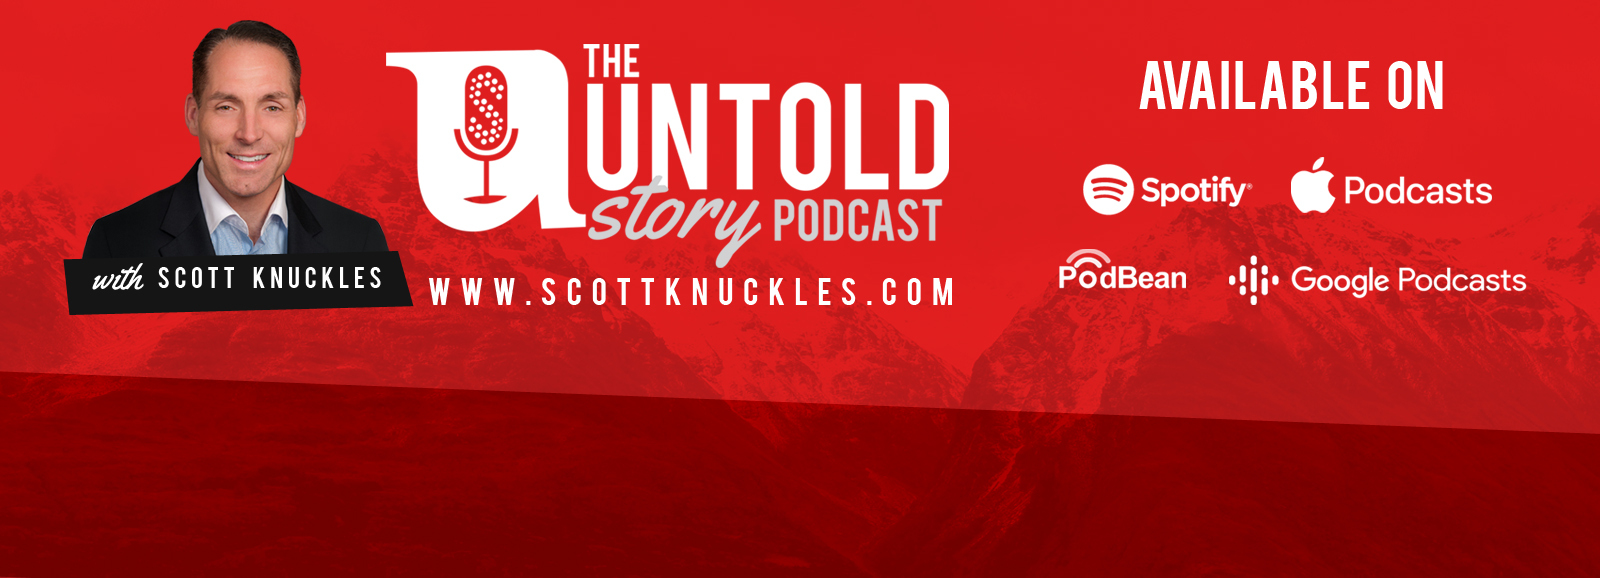 The Untold Story with Scott Knuckles